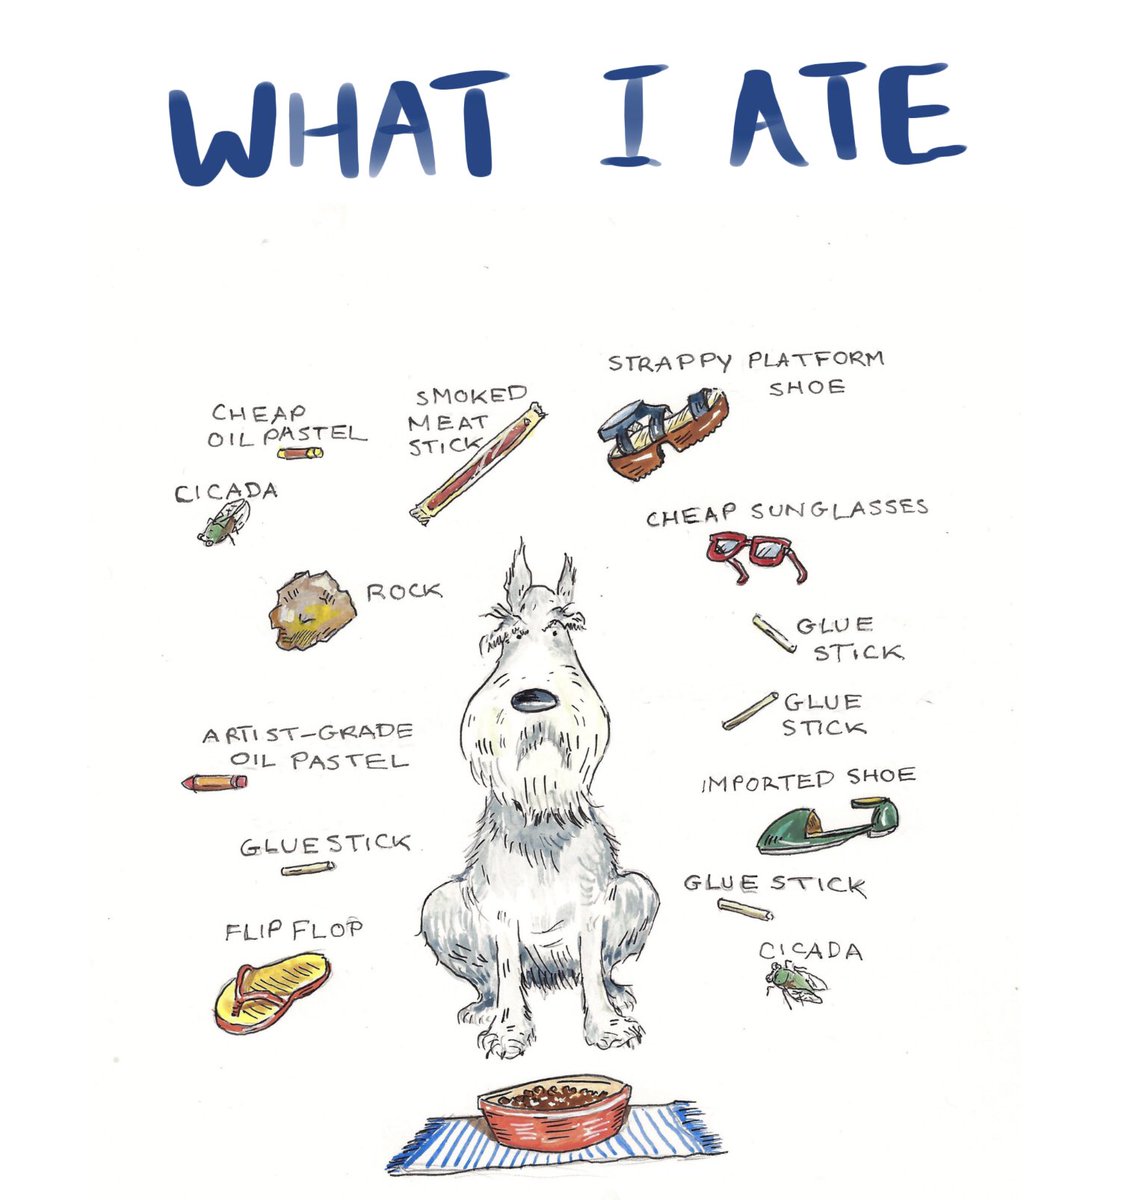 A day of cleaning up after my sick dog left me wiped out, but this 4+ year old drawing I did reminds me that nothing has changed! #whatmydogate, #mydogisahoover, #eatinggarbage, #schnauzer, #dogowner, #dog, #DogAteARock, #DogAteGarlic, #DogAteButtonsOffMyShoe, #dogillustration,